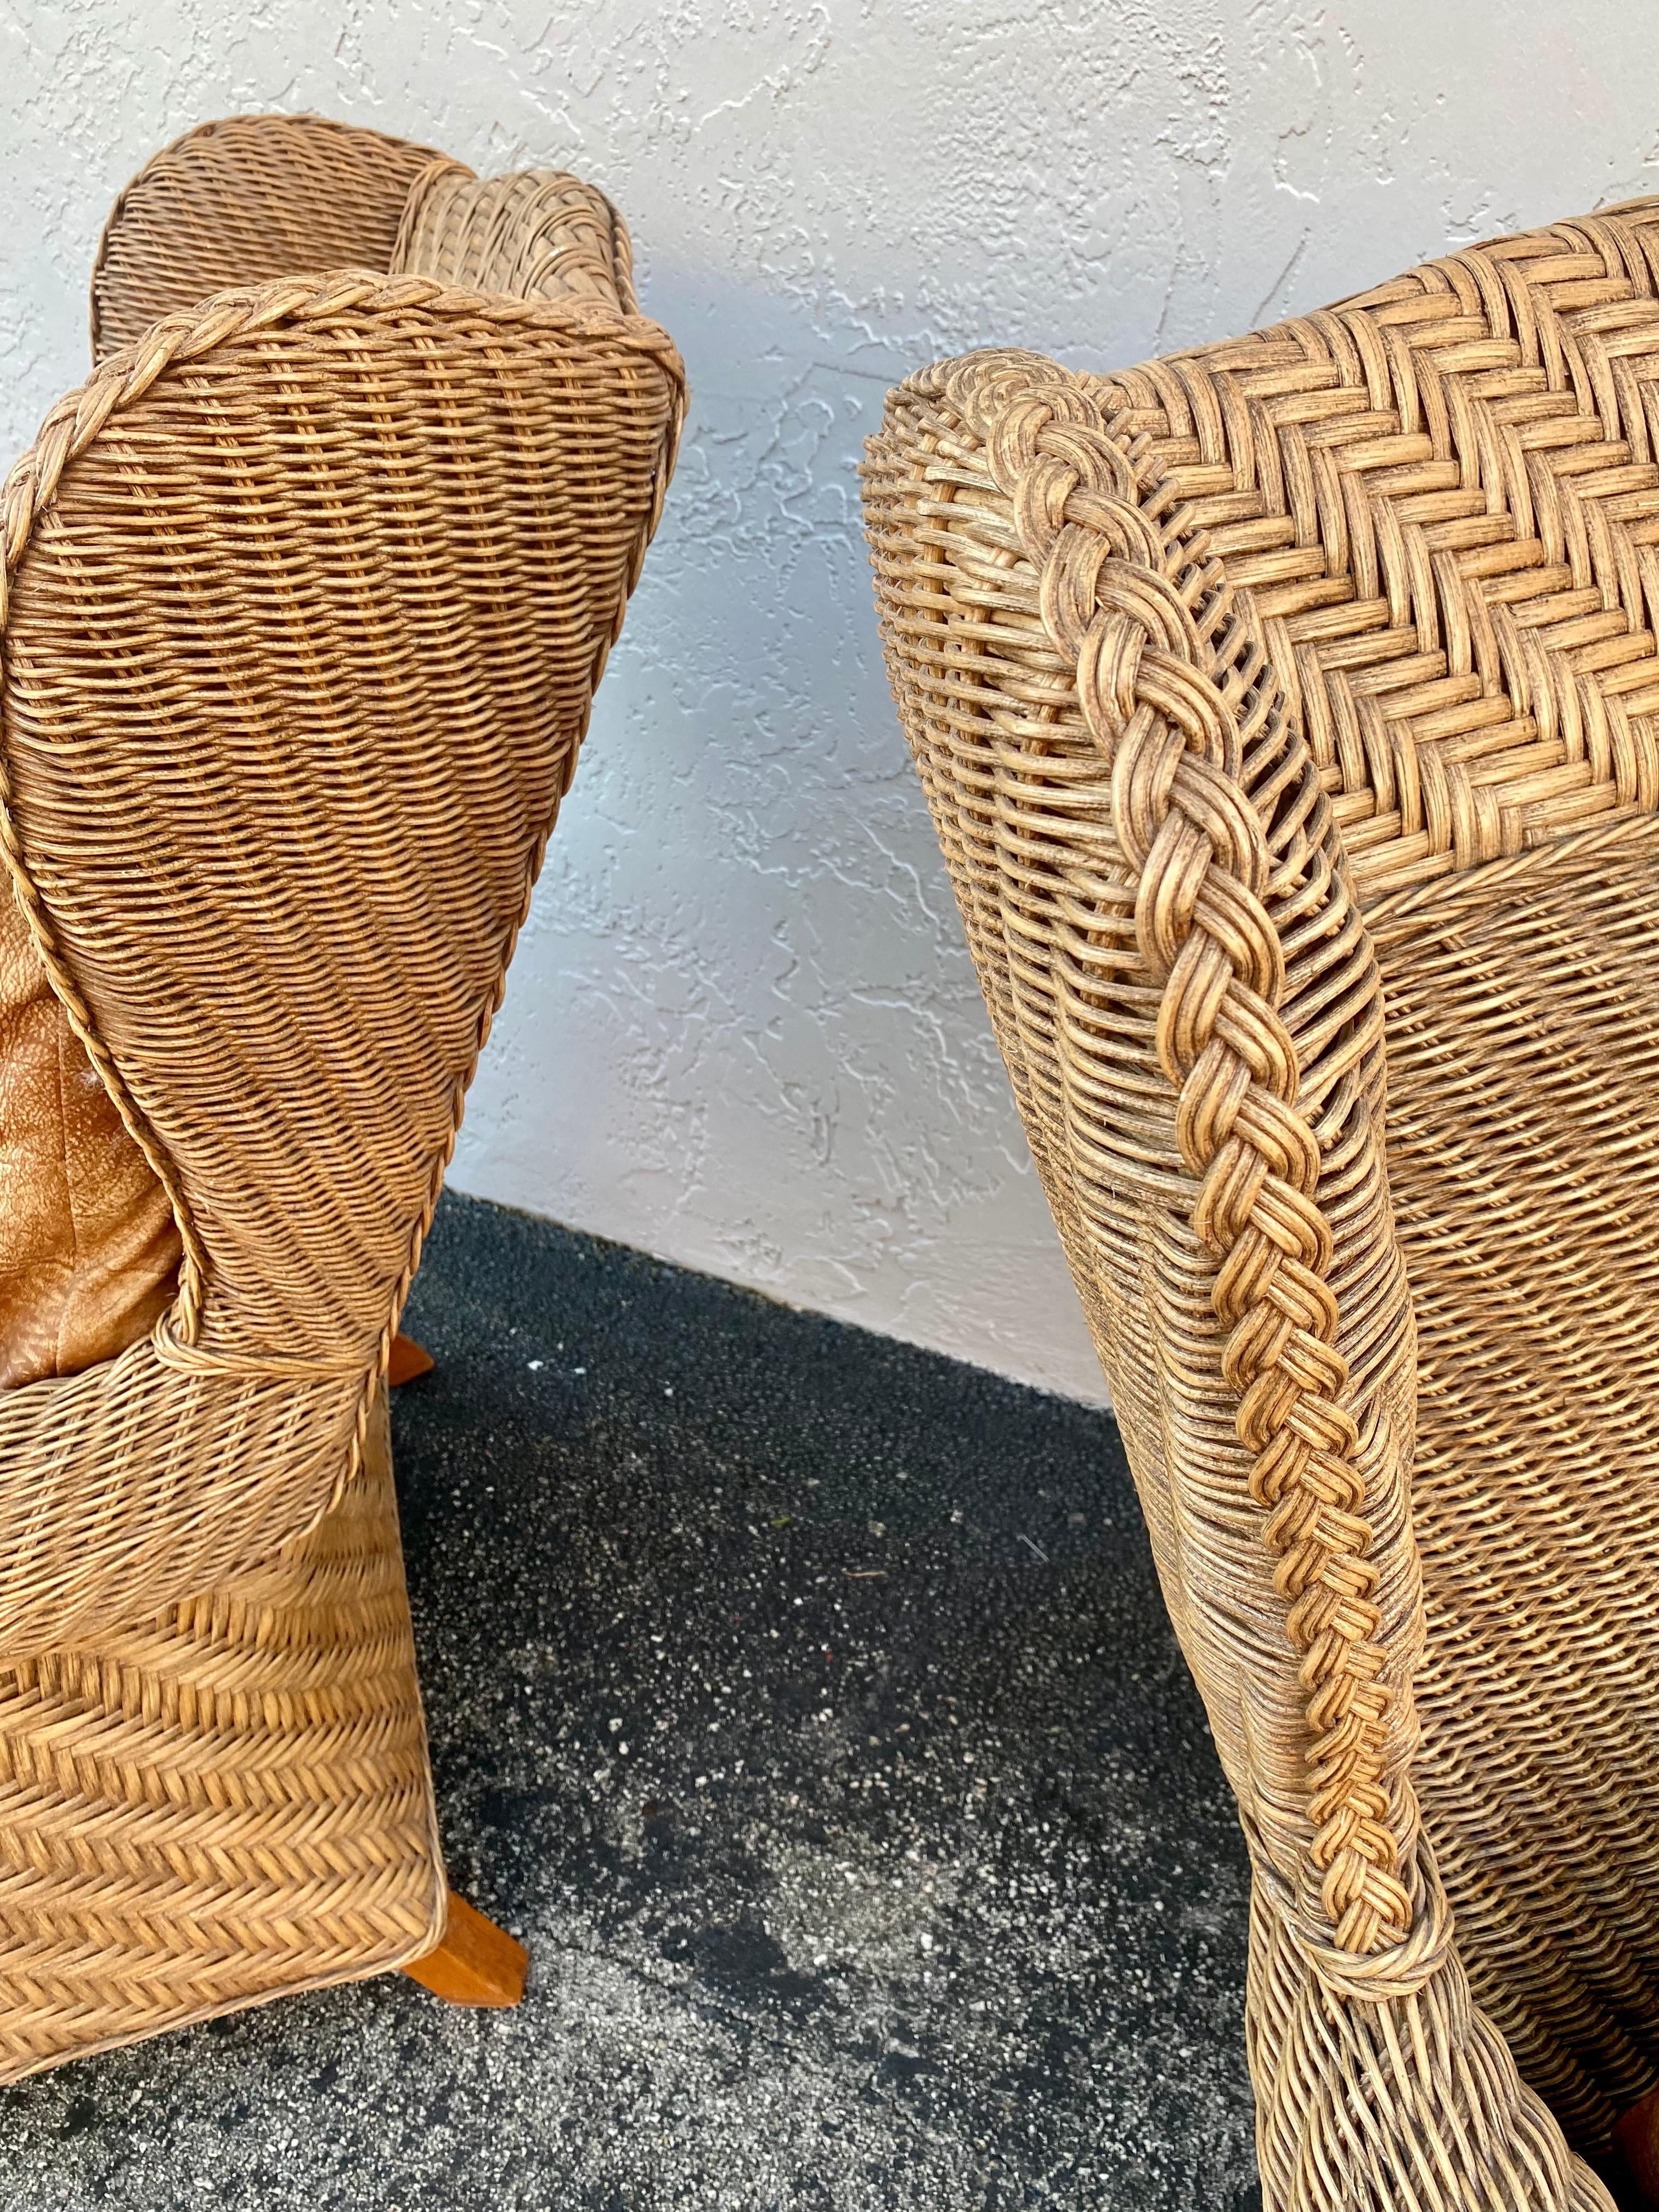 1980s Rattan Queen Anne Style XL Wingback Chairs, Set of 2 For Sale 3